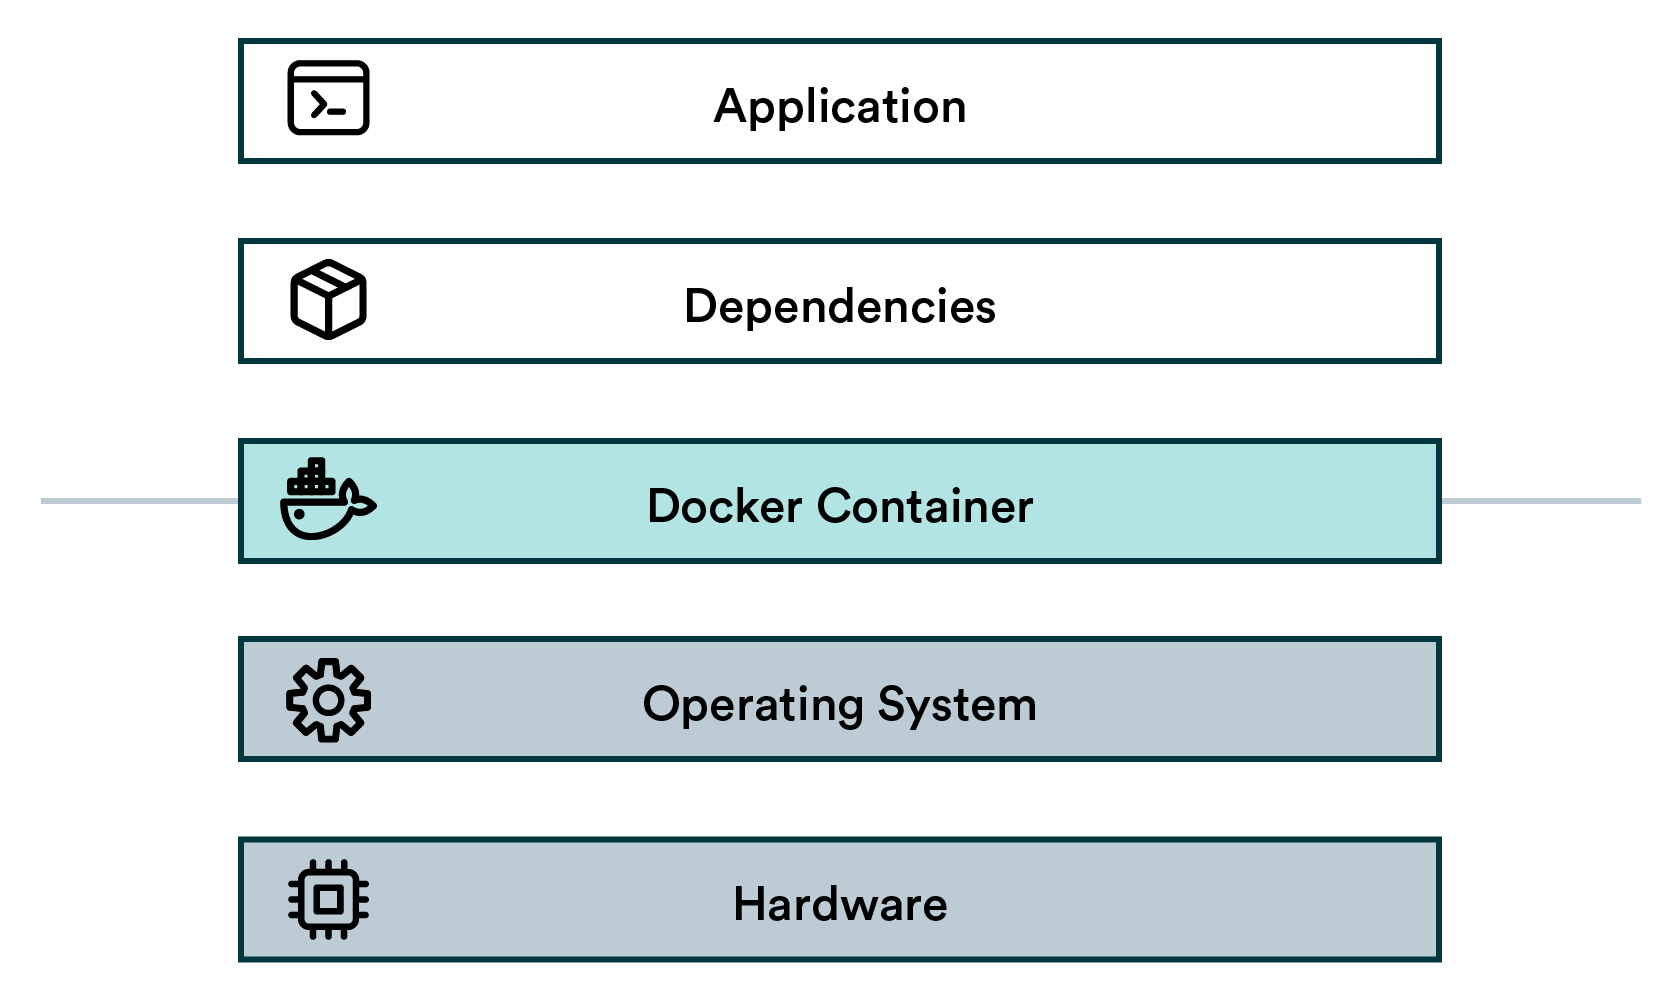 The containerized stack